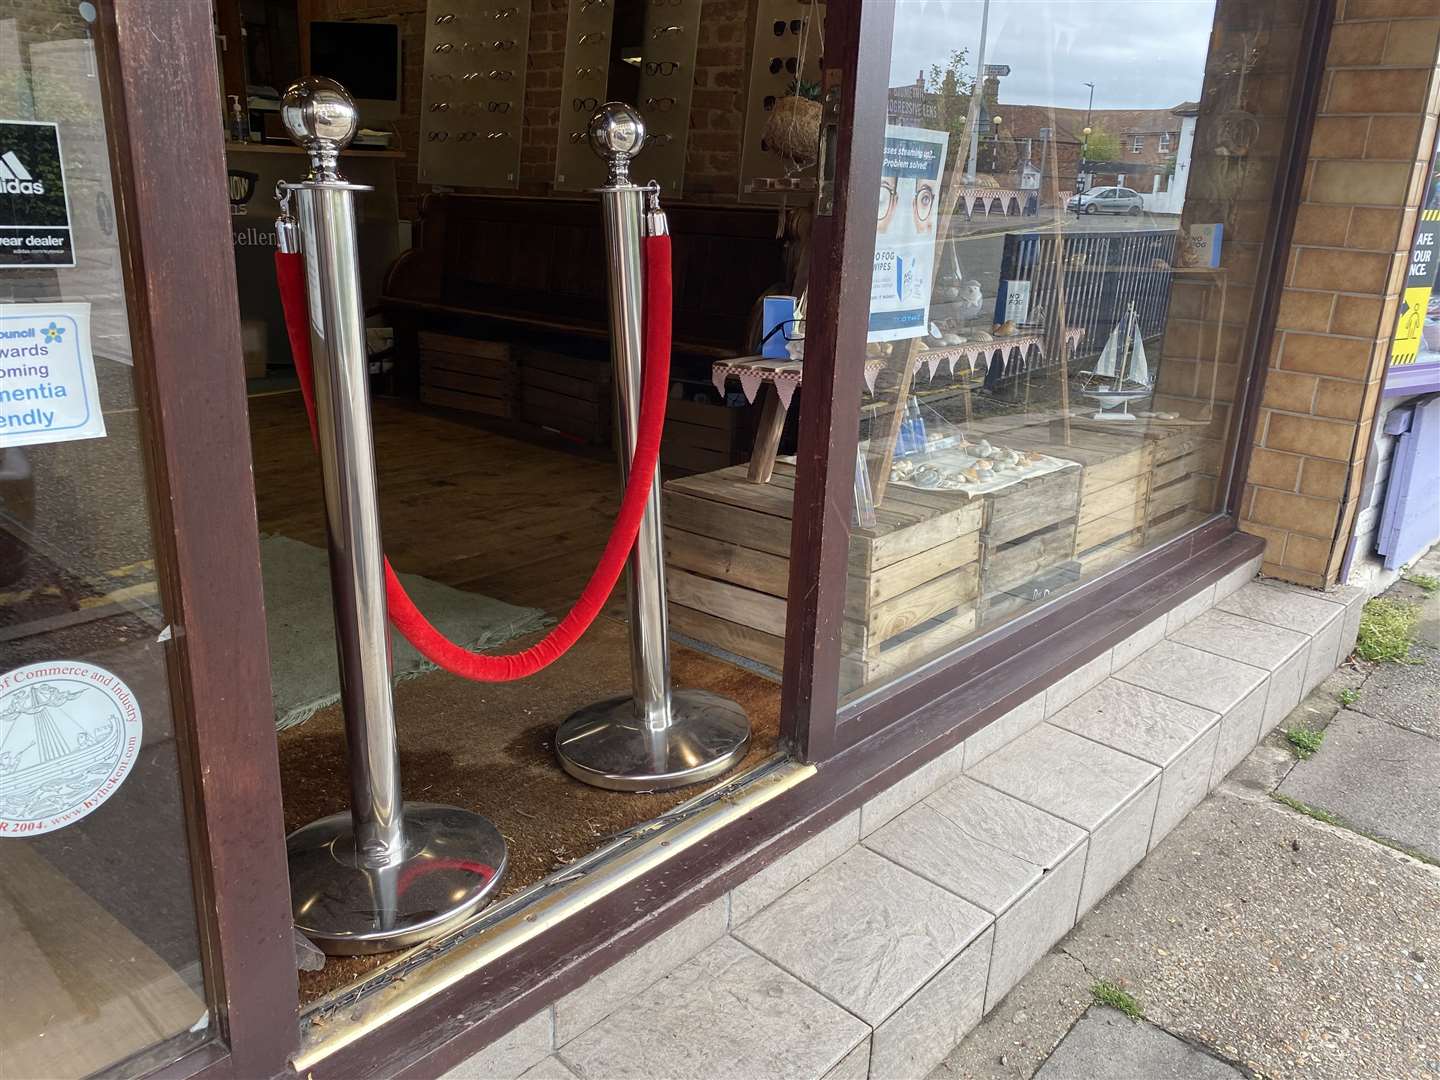 A barrier has been put over the entrance of David Snow Opticians in Hythe, due to wet carpet